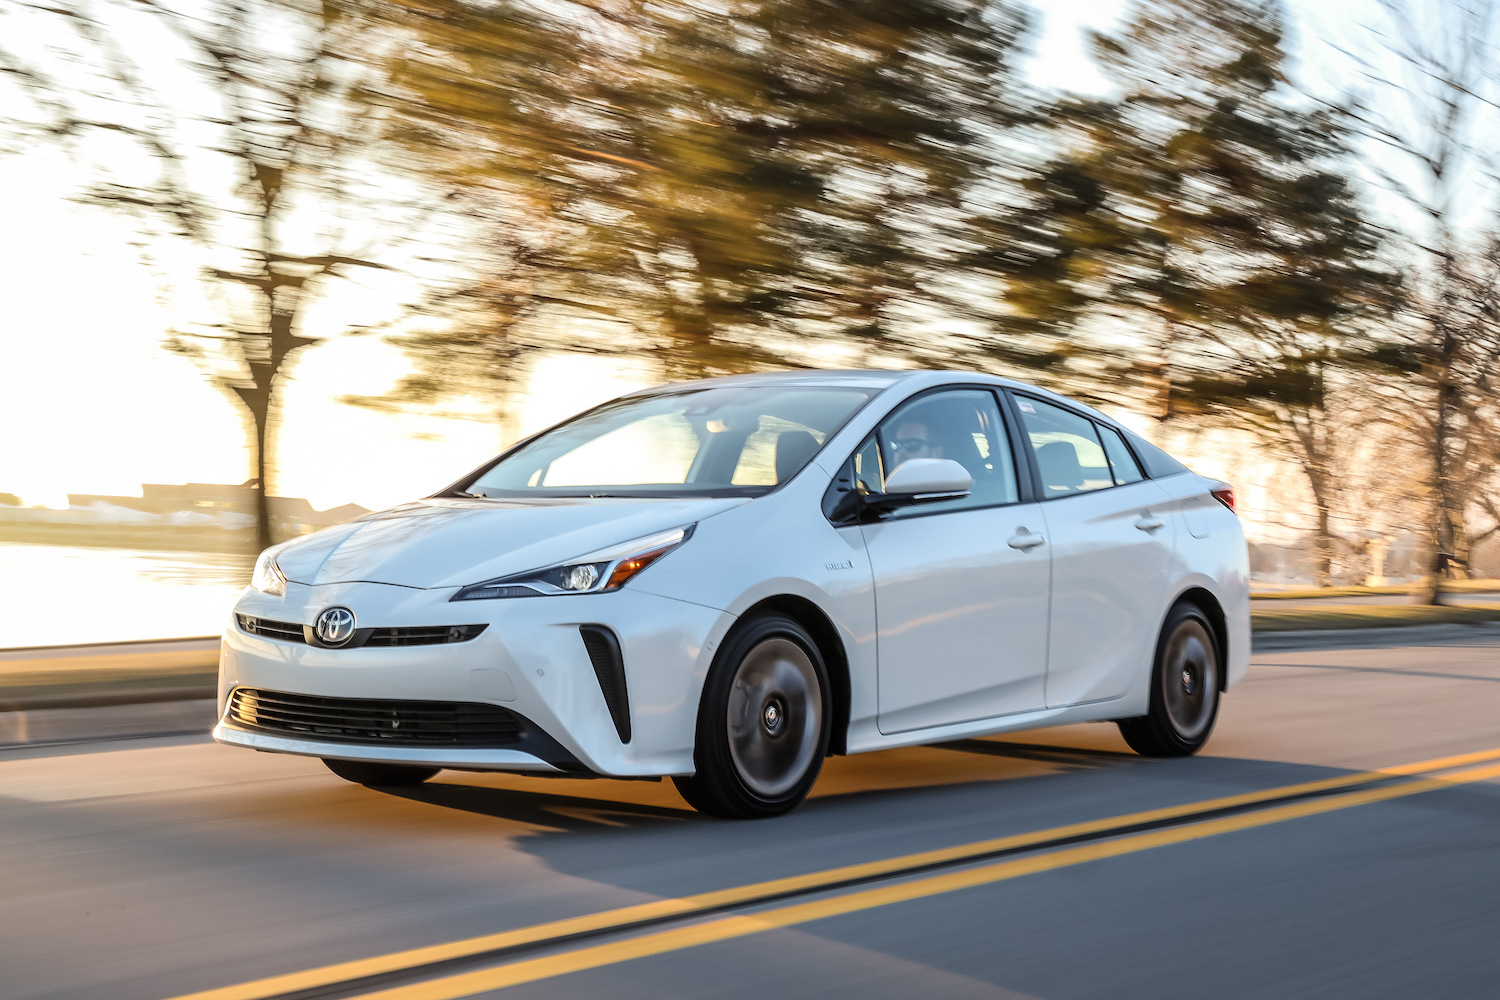 The Toyota Prius being driven